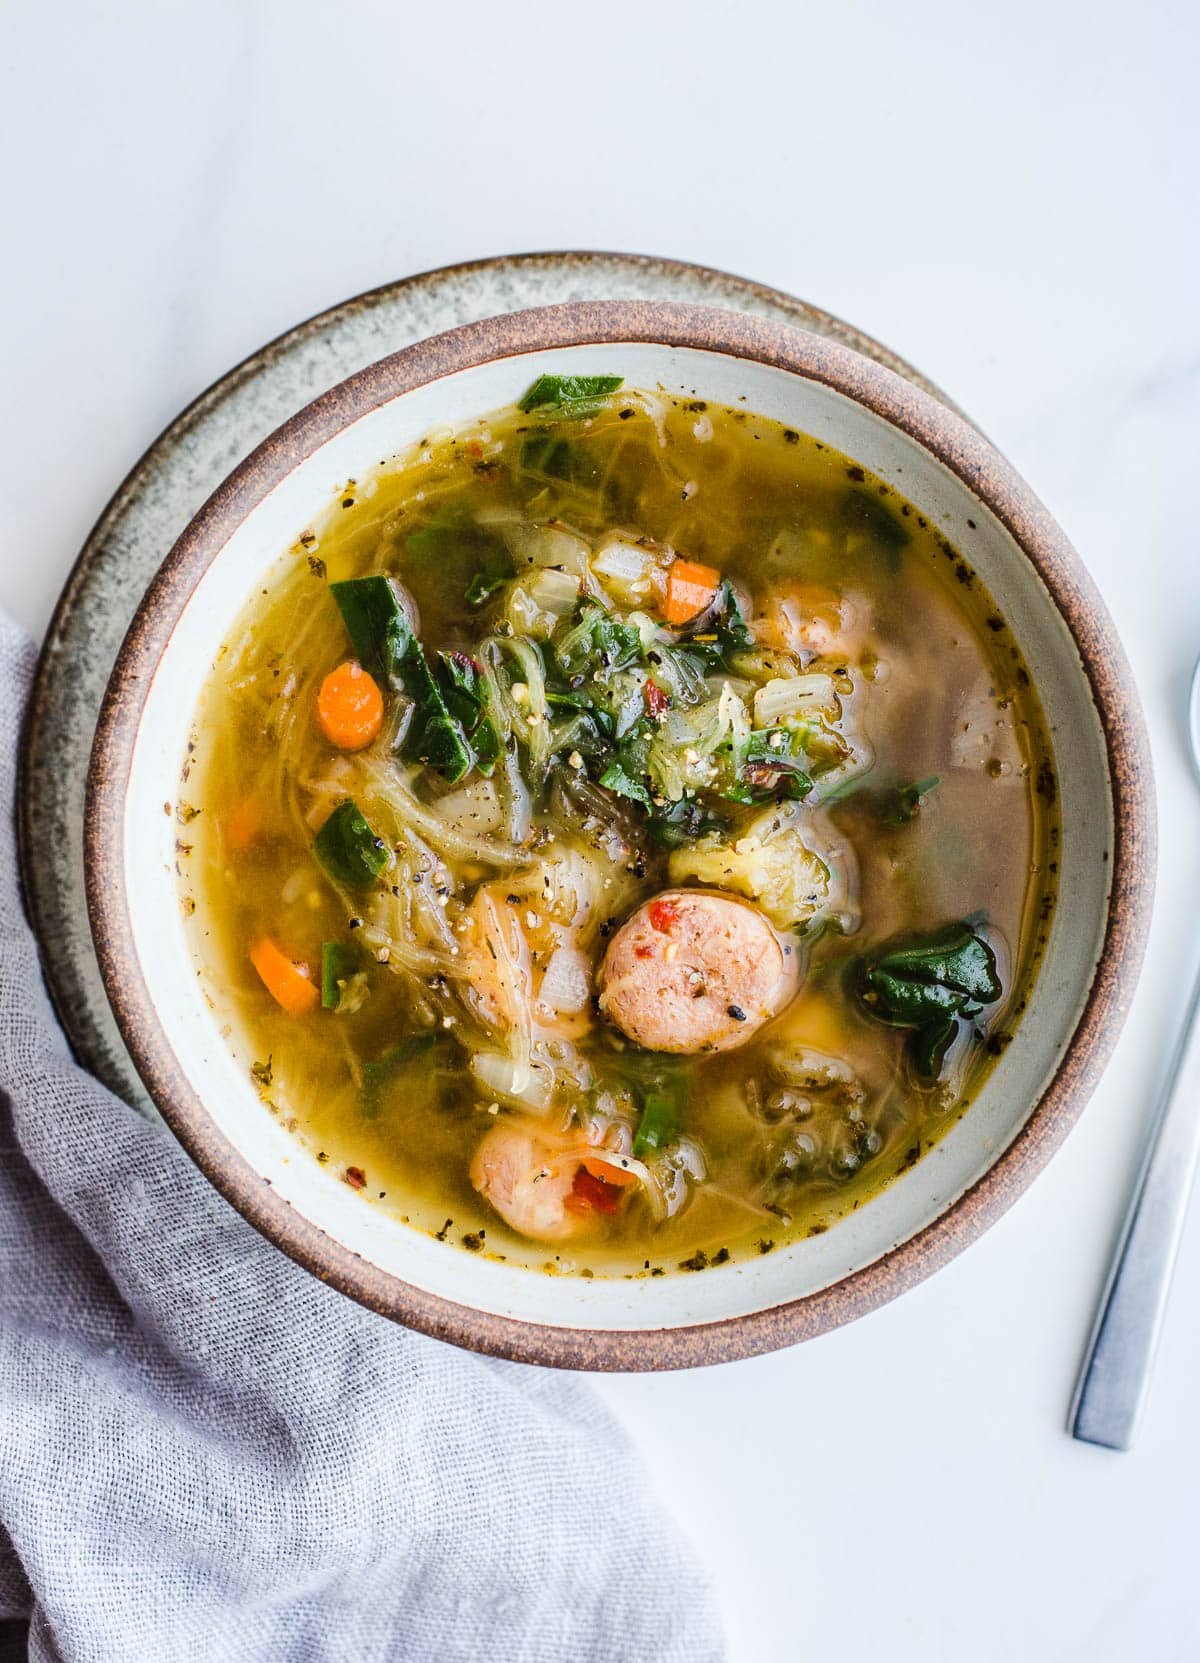 Squash and sausage soup in a rustic bowl.